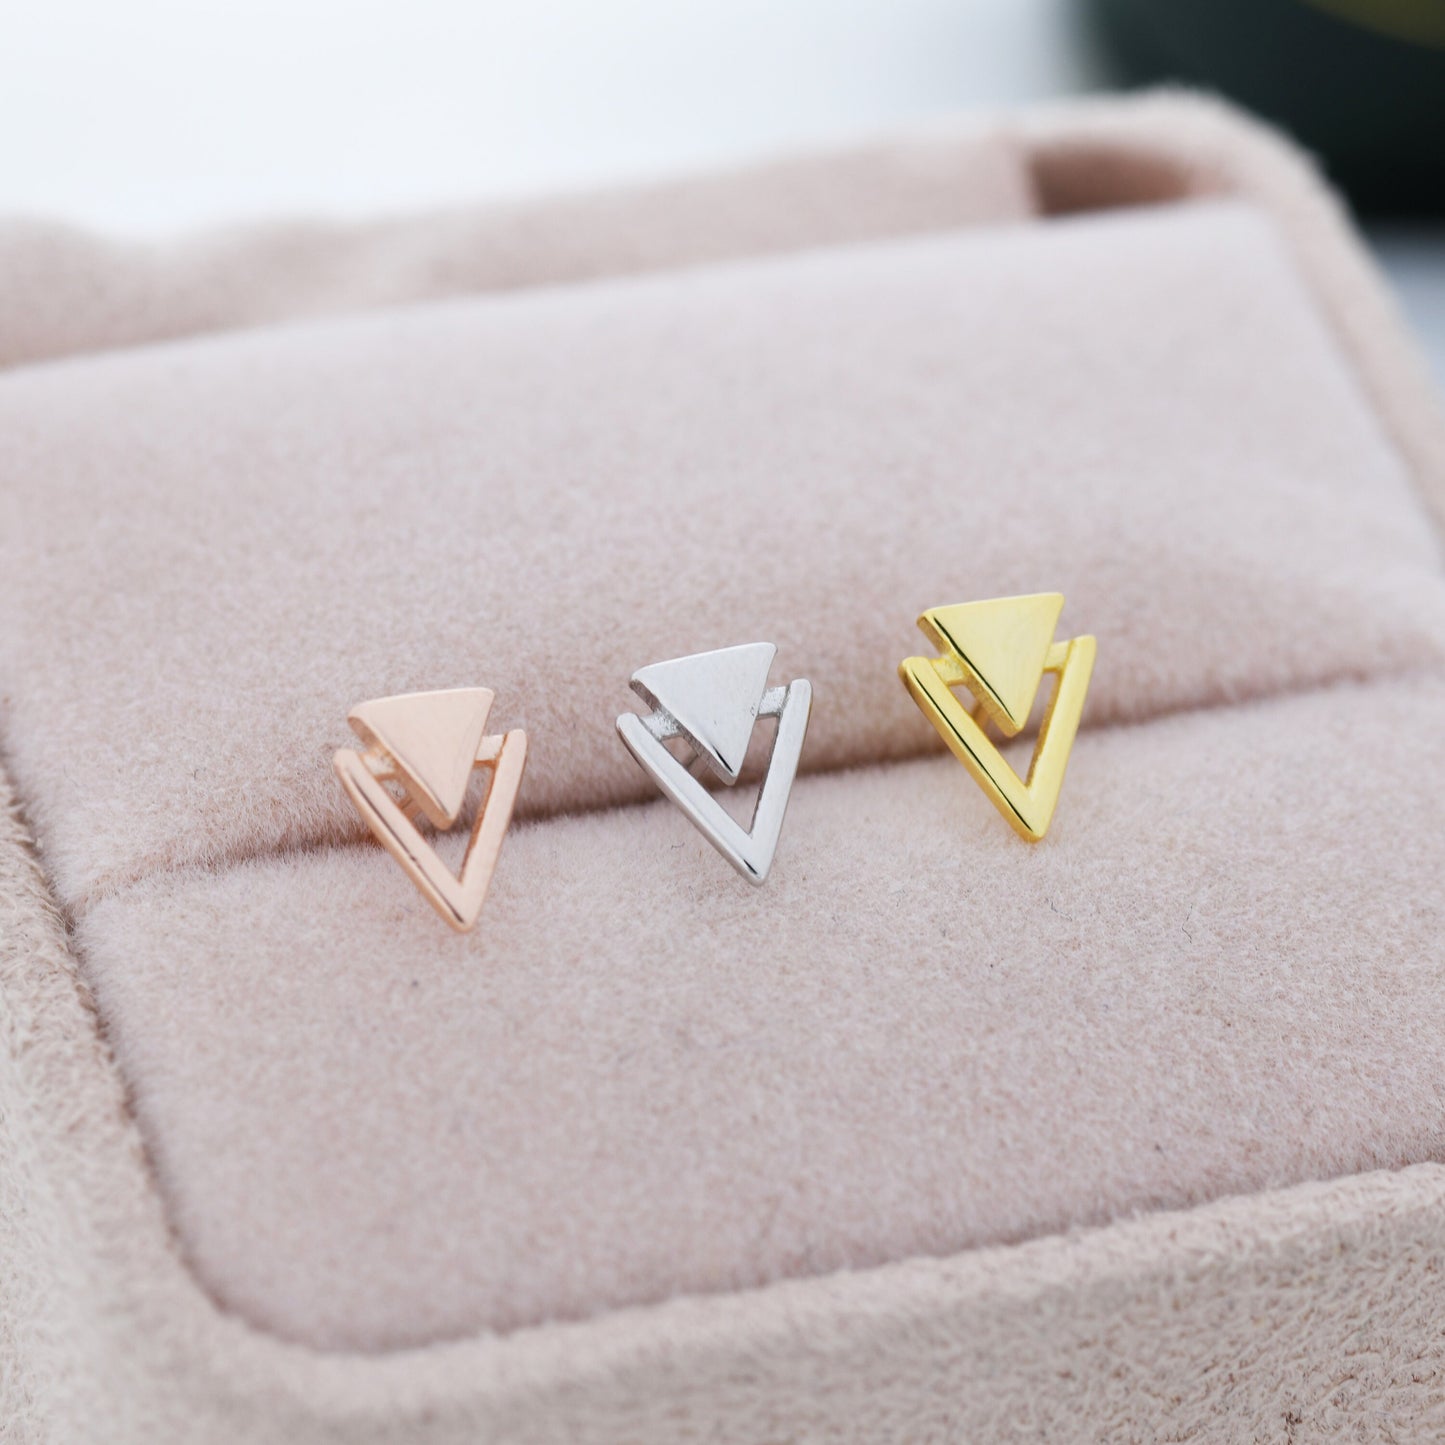 Sterling Silver Double Triangle Stud Earrings,  Silver, Gold or Rose Gold,  Small Earrings, Stacking Earrings,